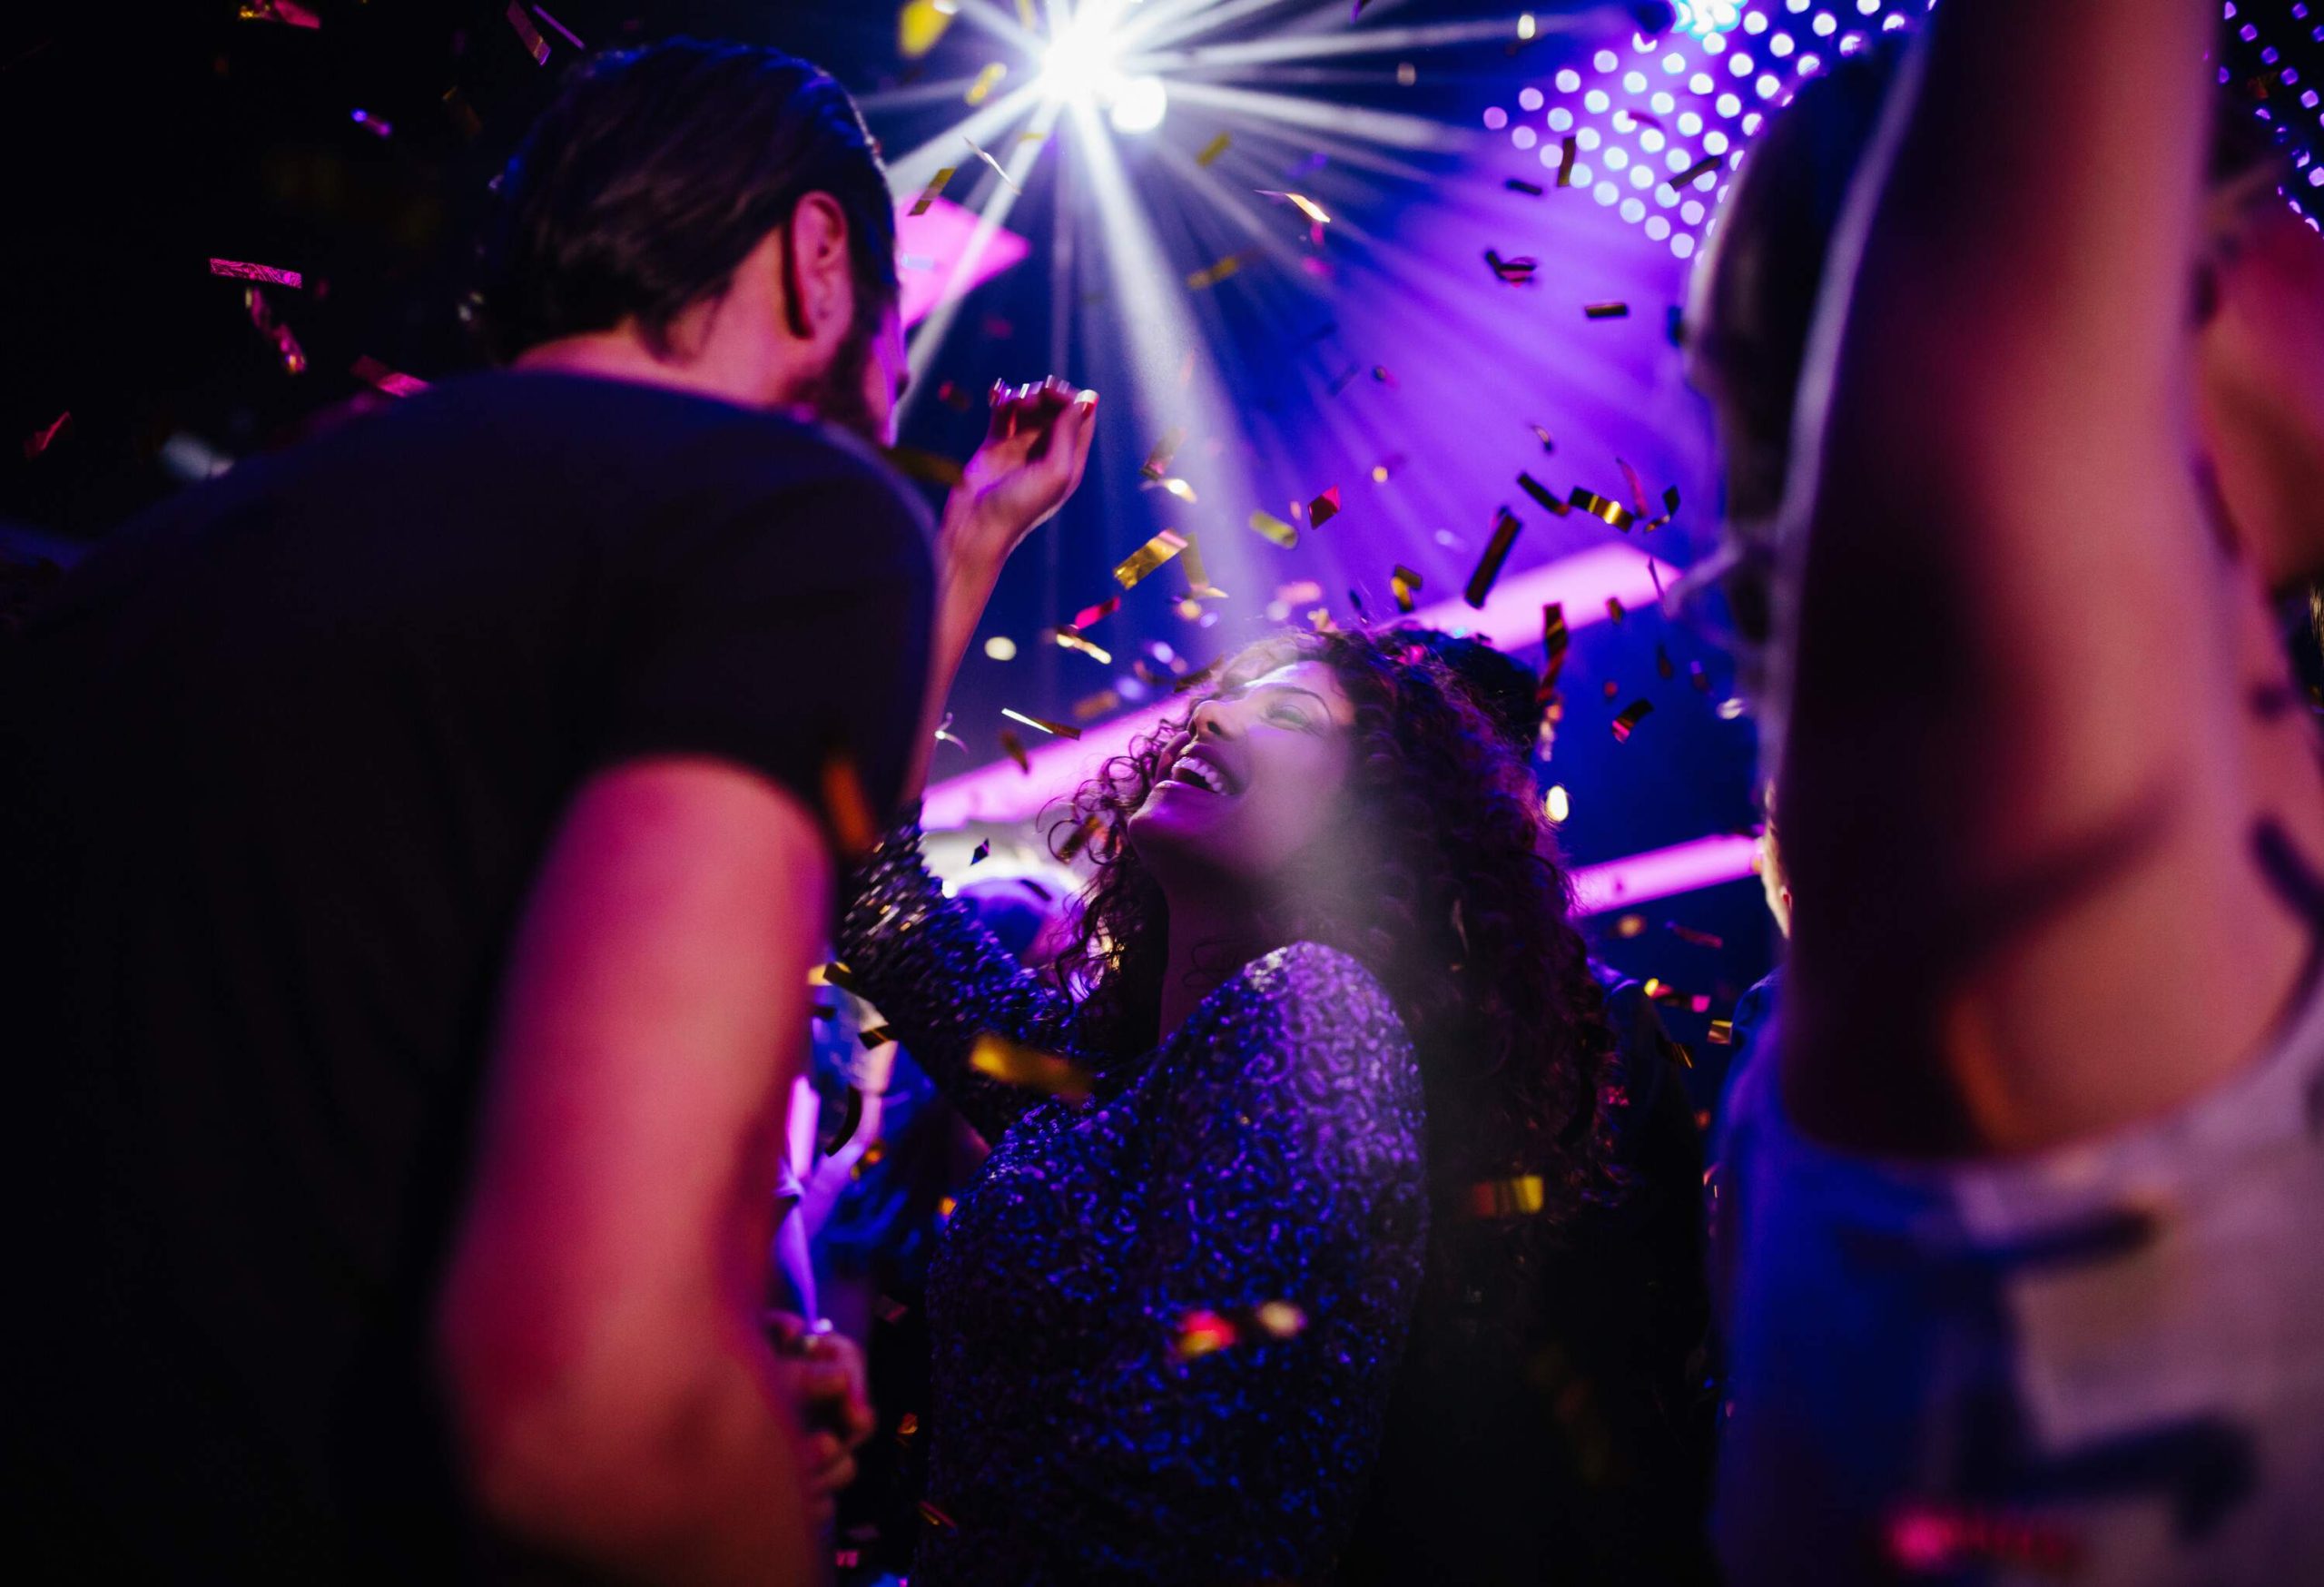 A young, multi-ethnic group of friends joyfully dance and have a blast at a nightclub party, surrounded by colourful confetti as they celebrate life and friendship.